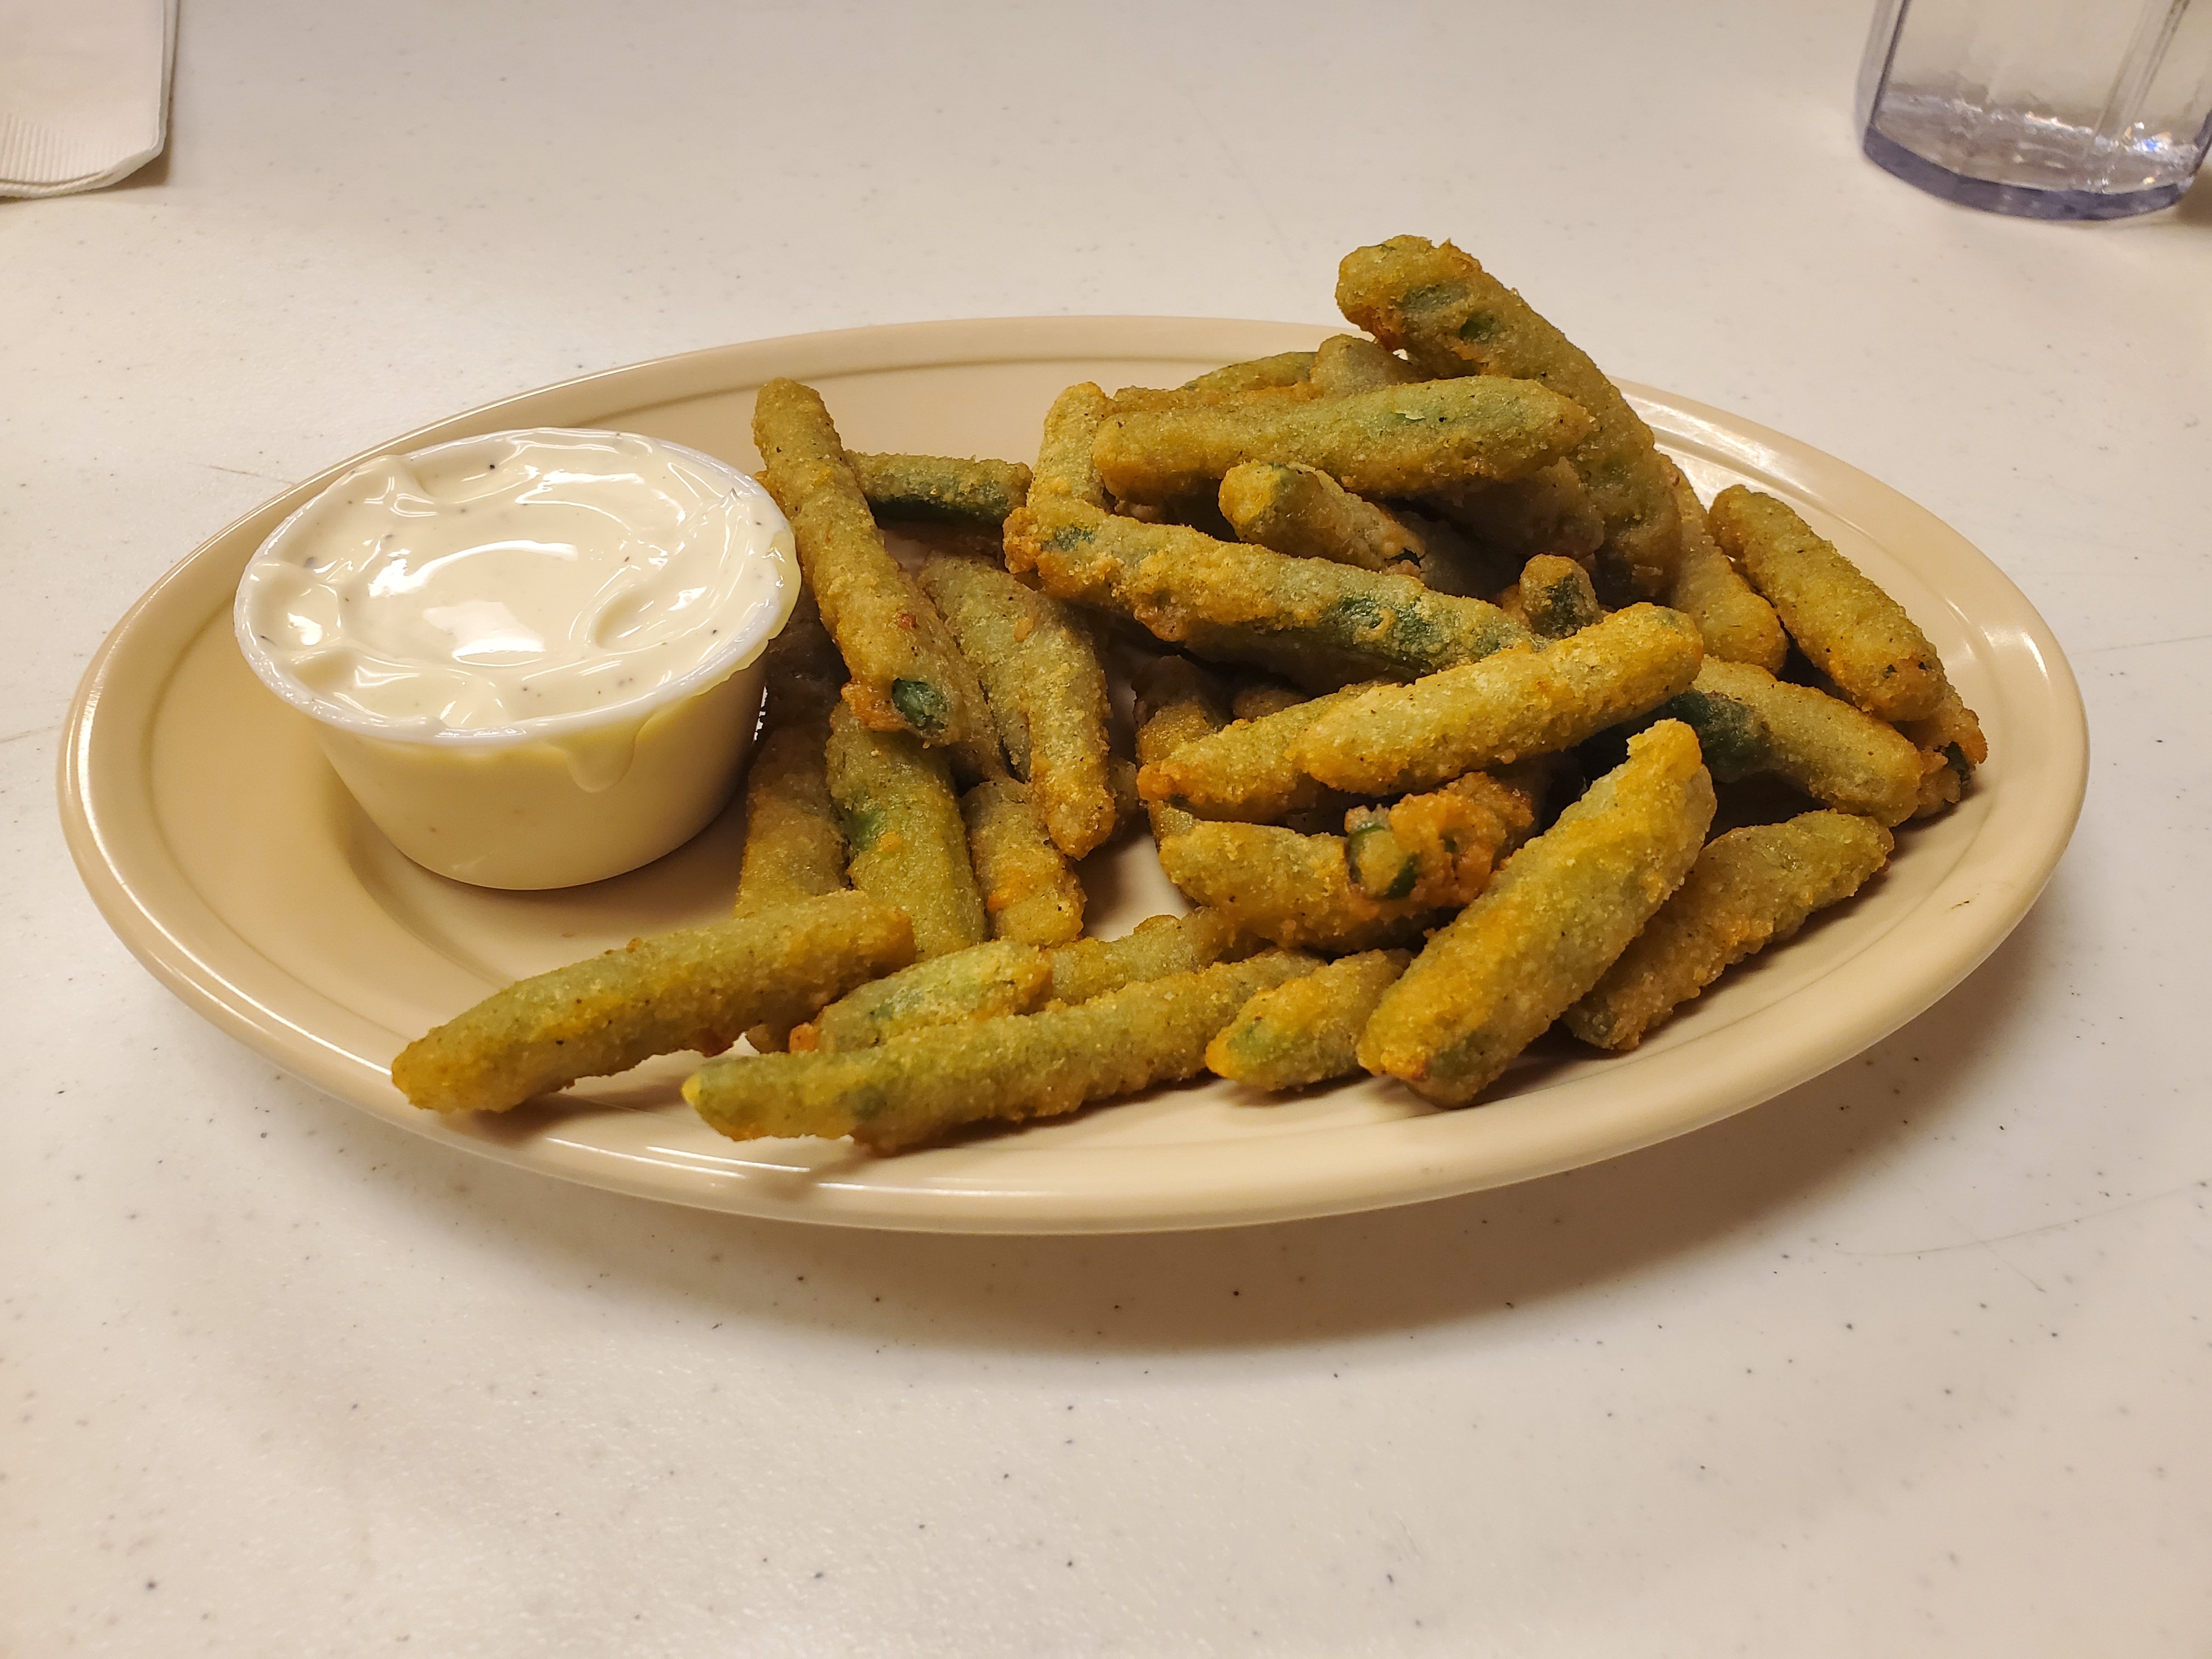 A plate of fried green beans and a side cup of ranch. Photo by Carl Busch.